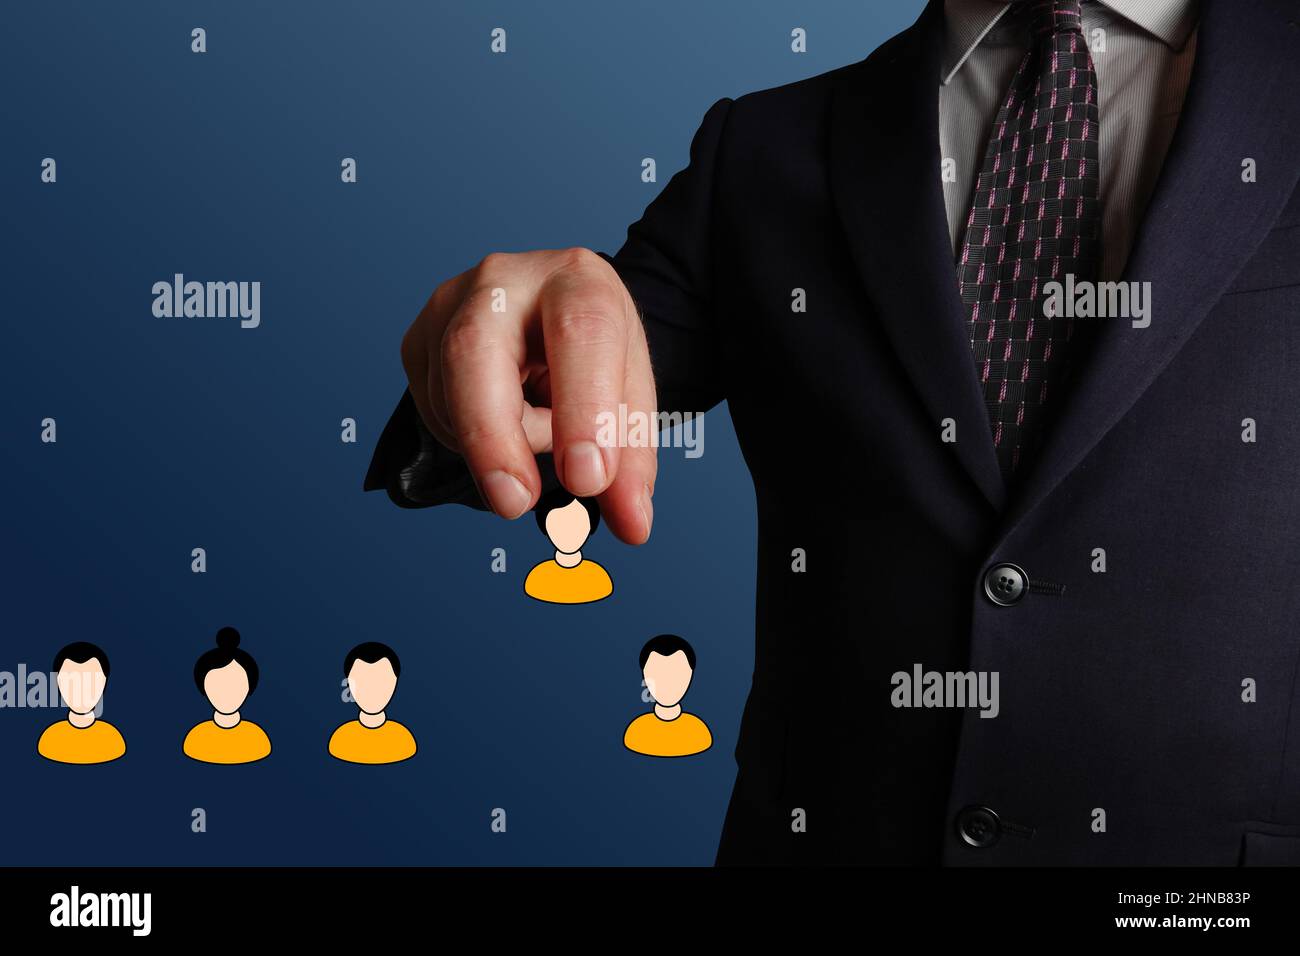 Manager selecting a person among candidates. Teamleader, leadership. Stock Photo